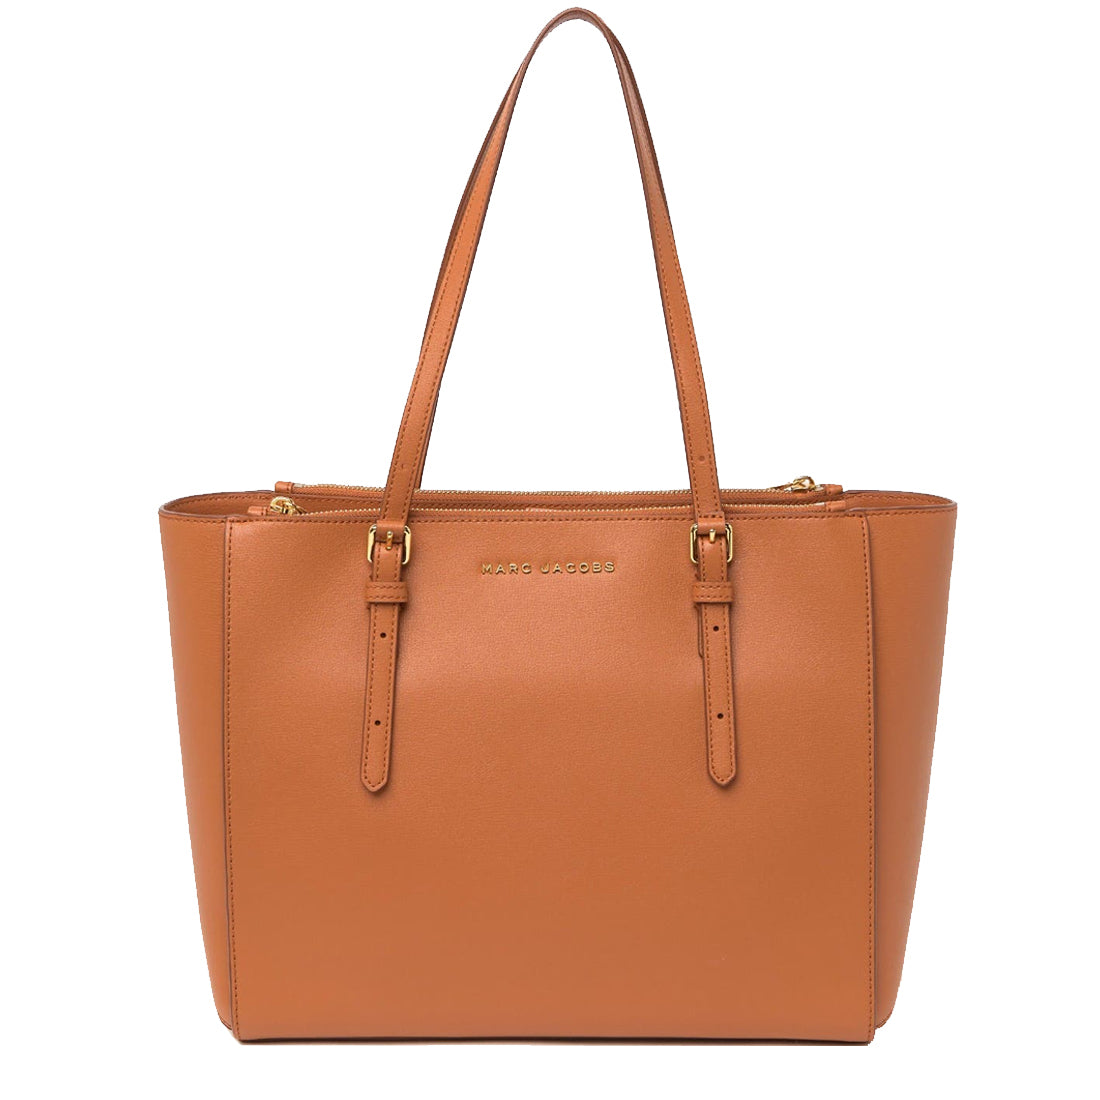 Marc Jacobs Commuter Tote Bag in Smoked Almond – PinkOrchard.com